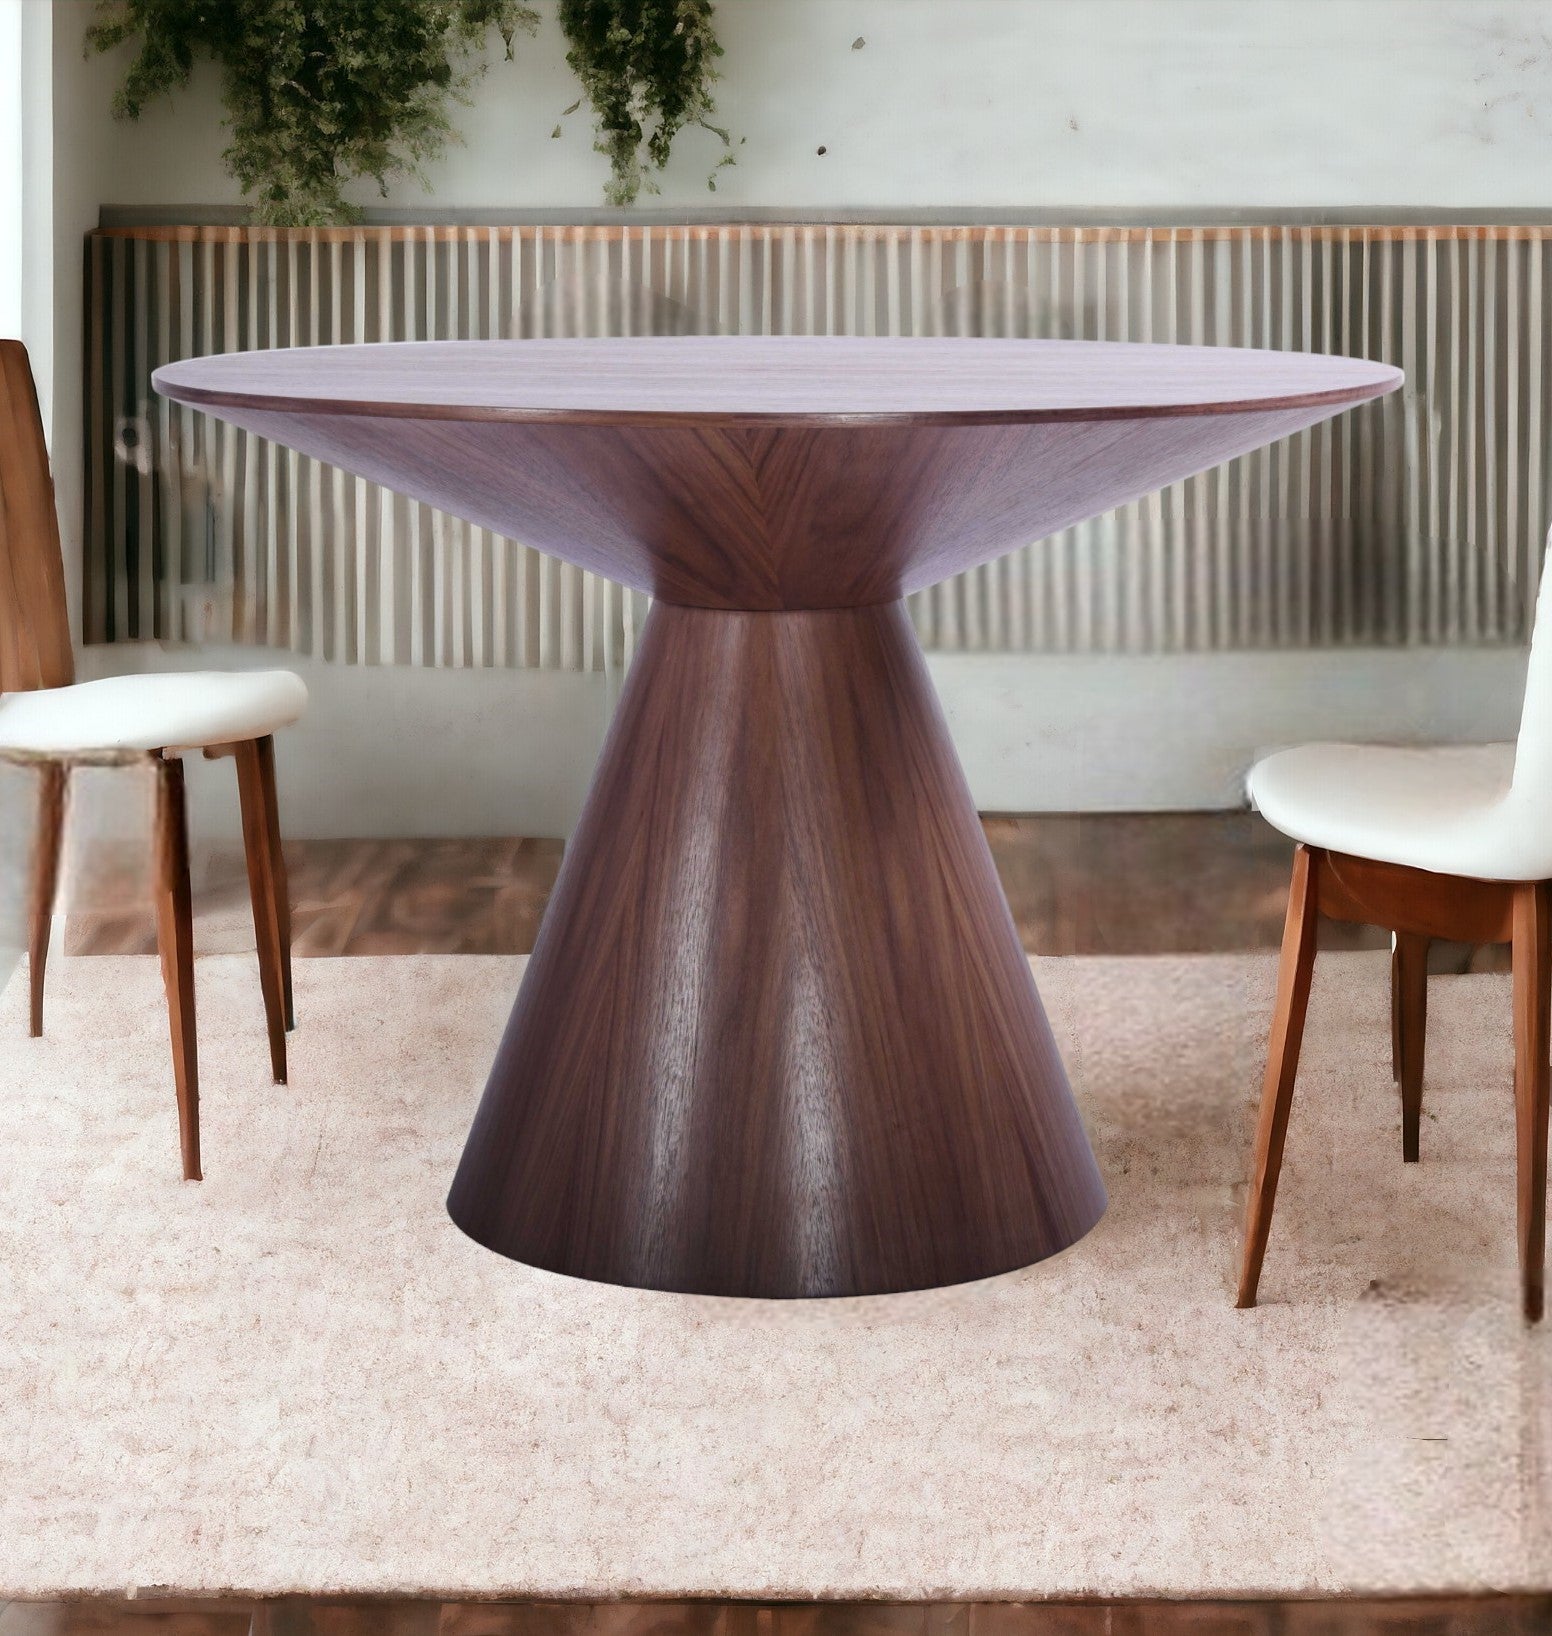 47" Brown Solid Wood Dining Table